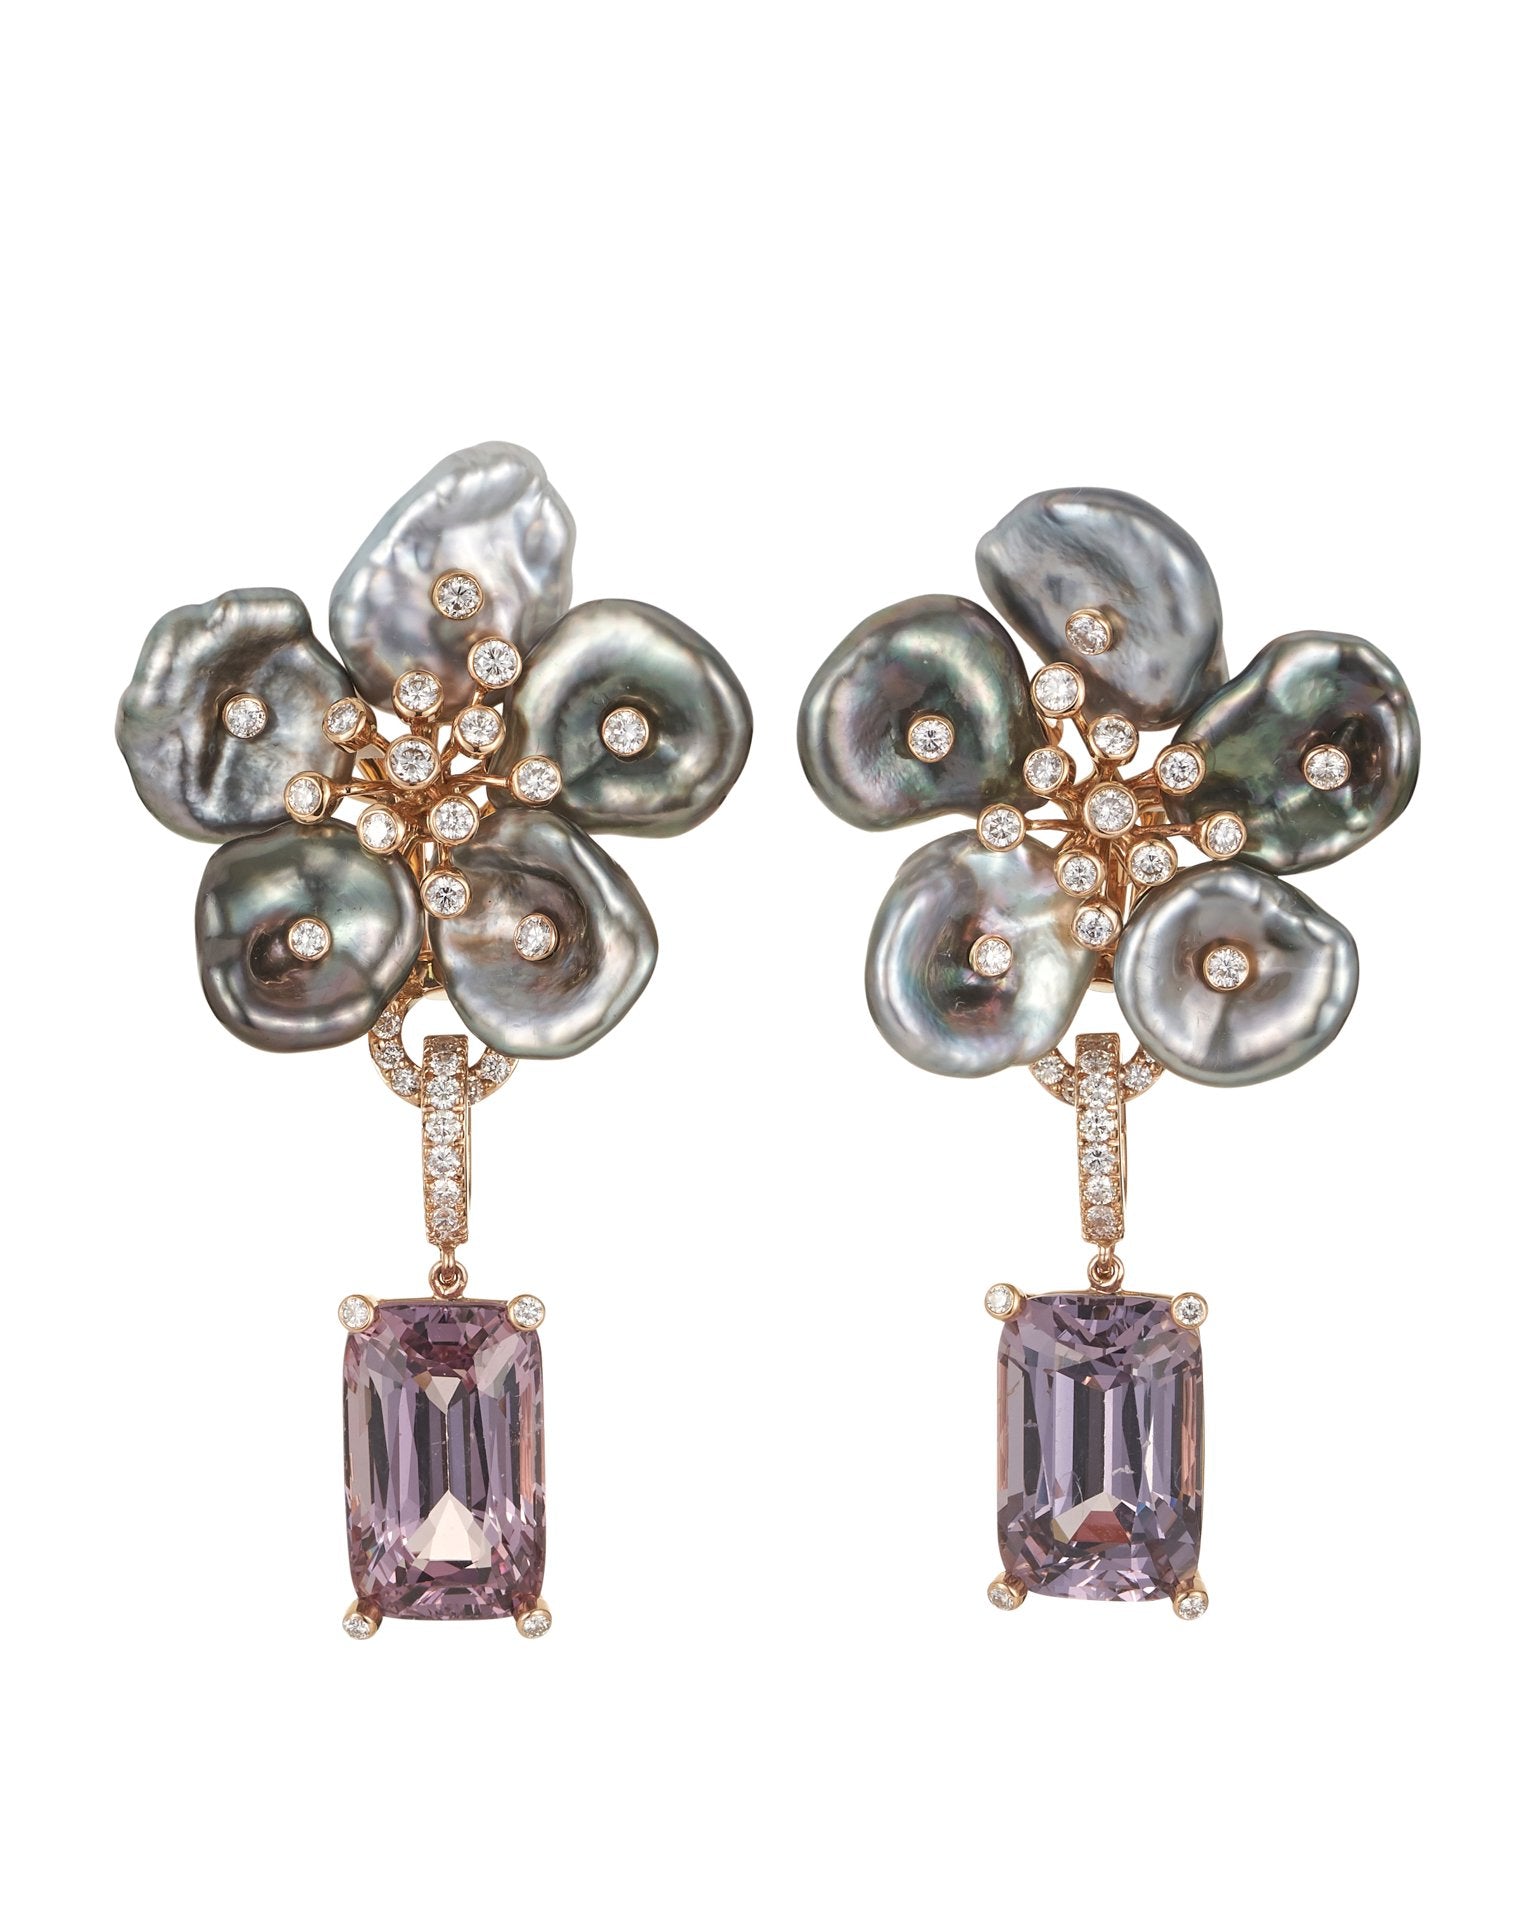 Tahitian Keshi Pearl flower earrings set with diamonds, with a pair of detachable lavender champagne spinel, crafted in 18 karat rose gold.